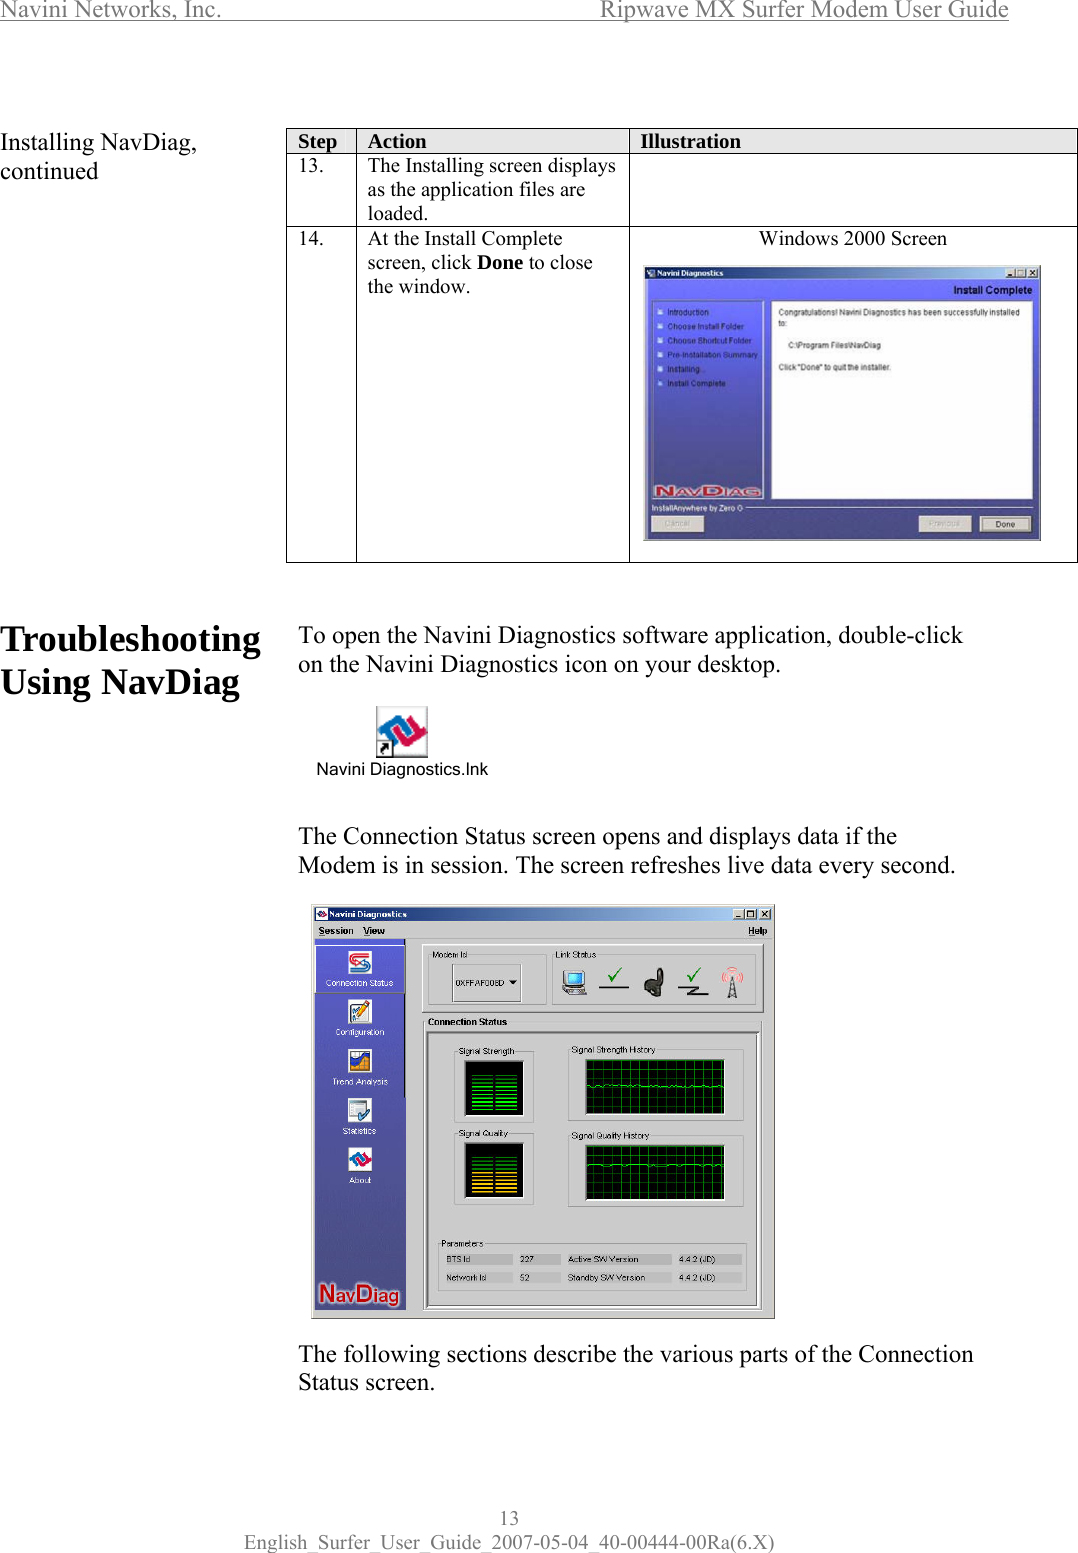 Navini Networks, Inc.      Ripwave MX Surfer Modem User Guide 13 English_Surfer_User_Guide_2007-05-04_40-00444-00Ra(6.X)  Installing NavDiag, continued                Troubleshooting Using NavDiag                       Step  Action  Illustration 13.  The Installing screen displays as the application files are loaded.  14.  At the Install Complete screen, click Done to close the window.            Windows 2000 Screen    To open the Navini Diagnostics software application, double-click on the Navini Diagnostics icon on your desktop.       The Connection Status screen opens and displays data if the Modem is in session. The screen refreshes live data every second.                 The following sections describe the various parts of the Connection Status screen. Navini Diagnostics.lnk